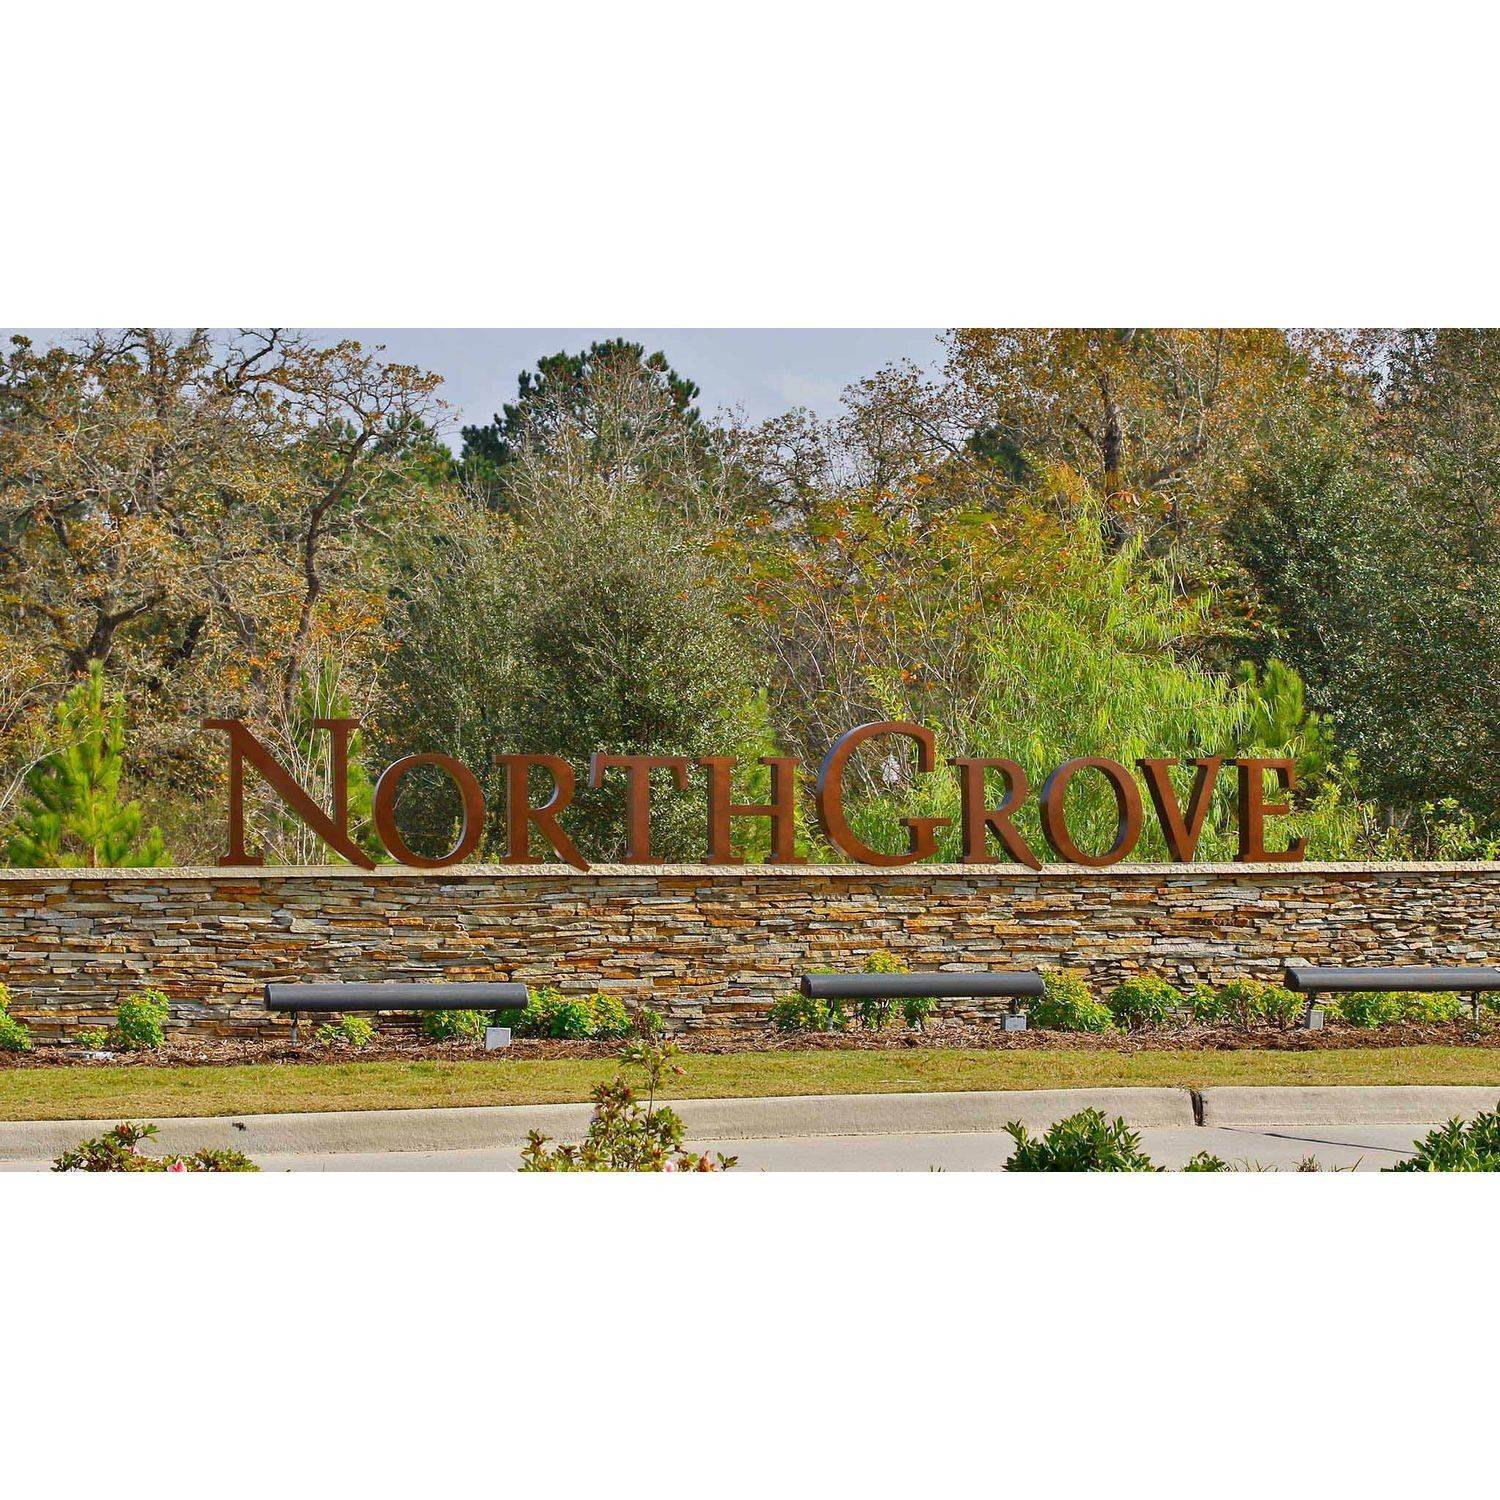 NorthGrove 50' xây dựng tại 7385 Grandview Meadow Drive, Magnolia, TX 77354